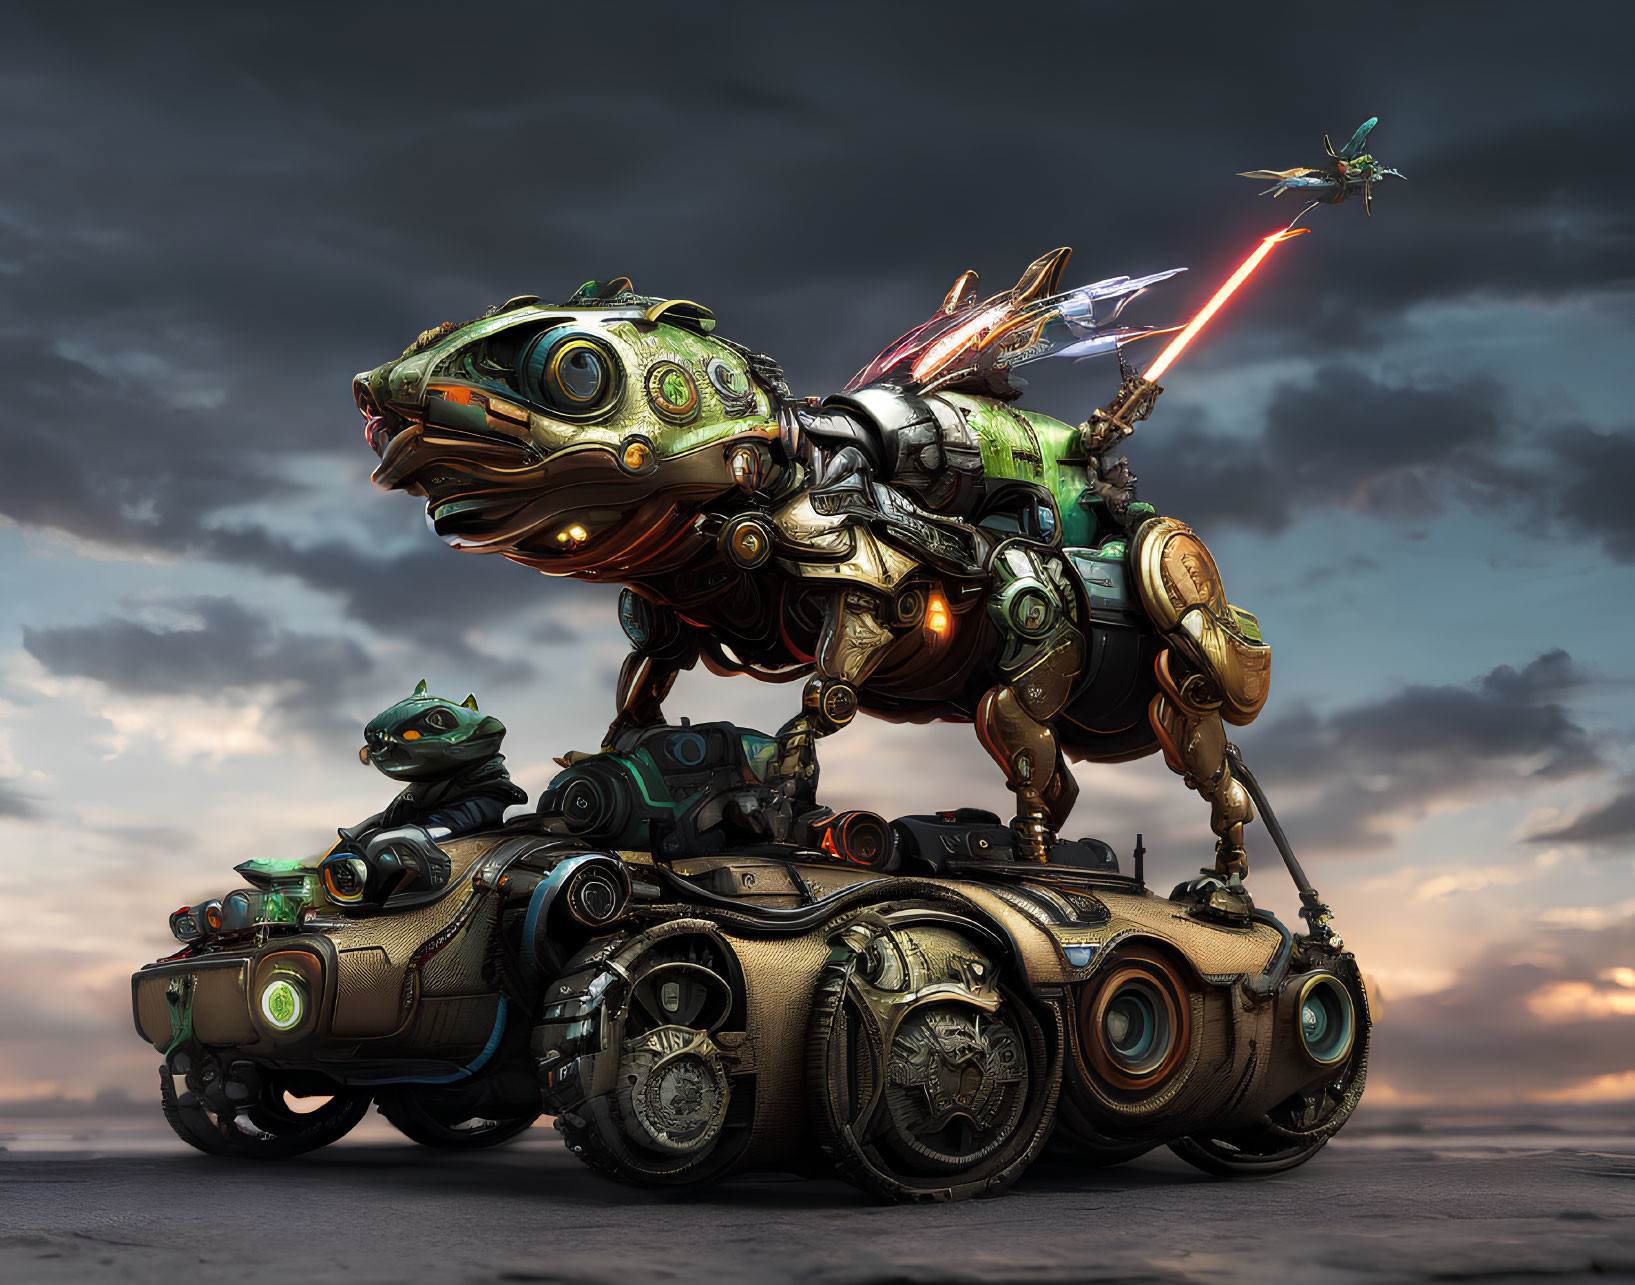 Mechanical frogs in futuristic battle gear on tracked vehicle under dramatic sky